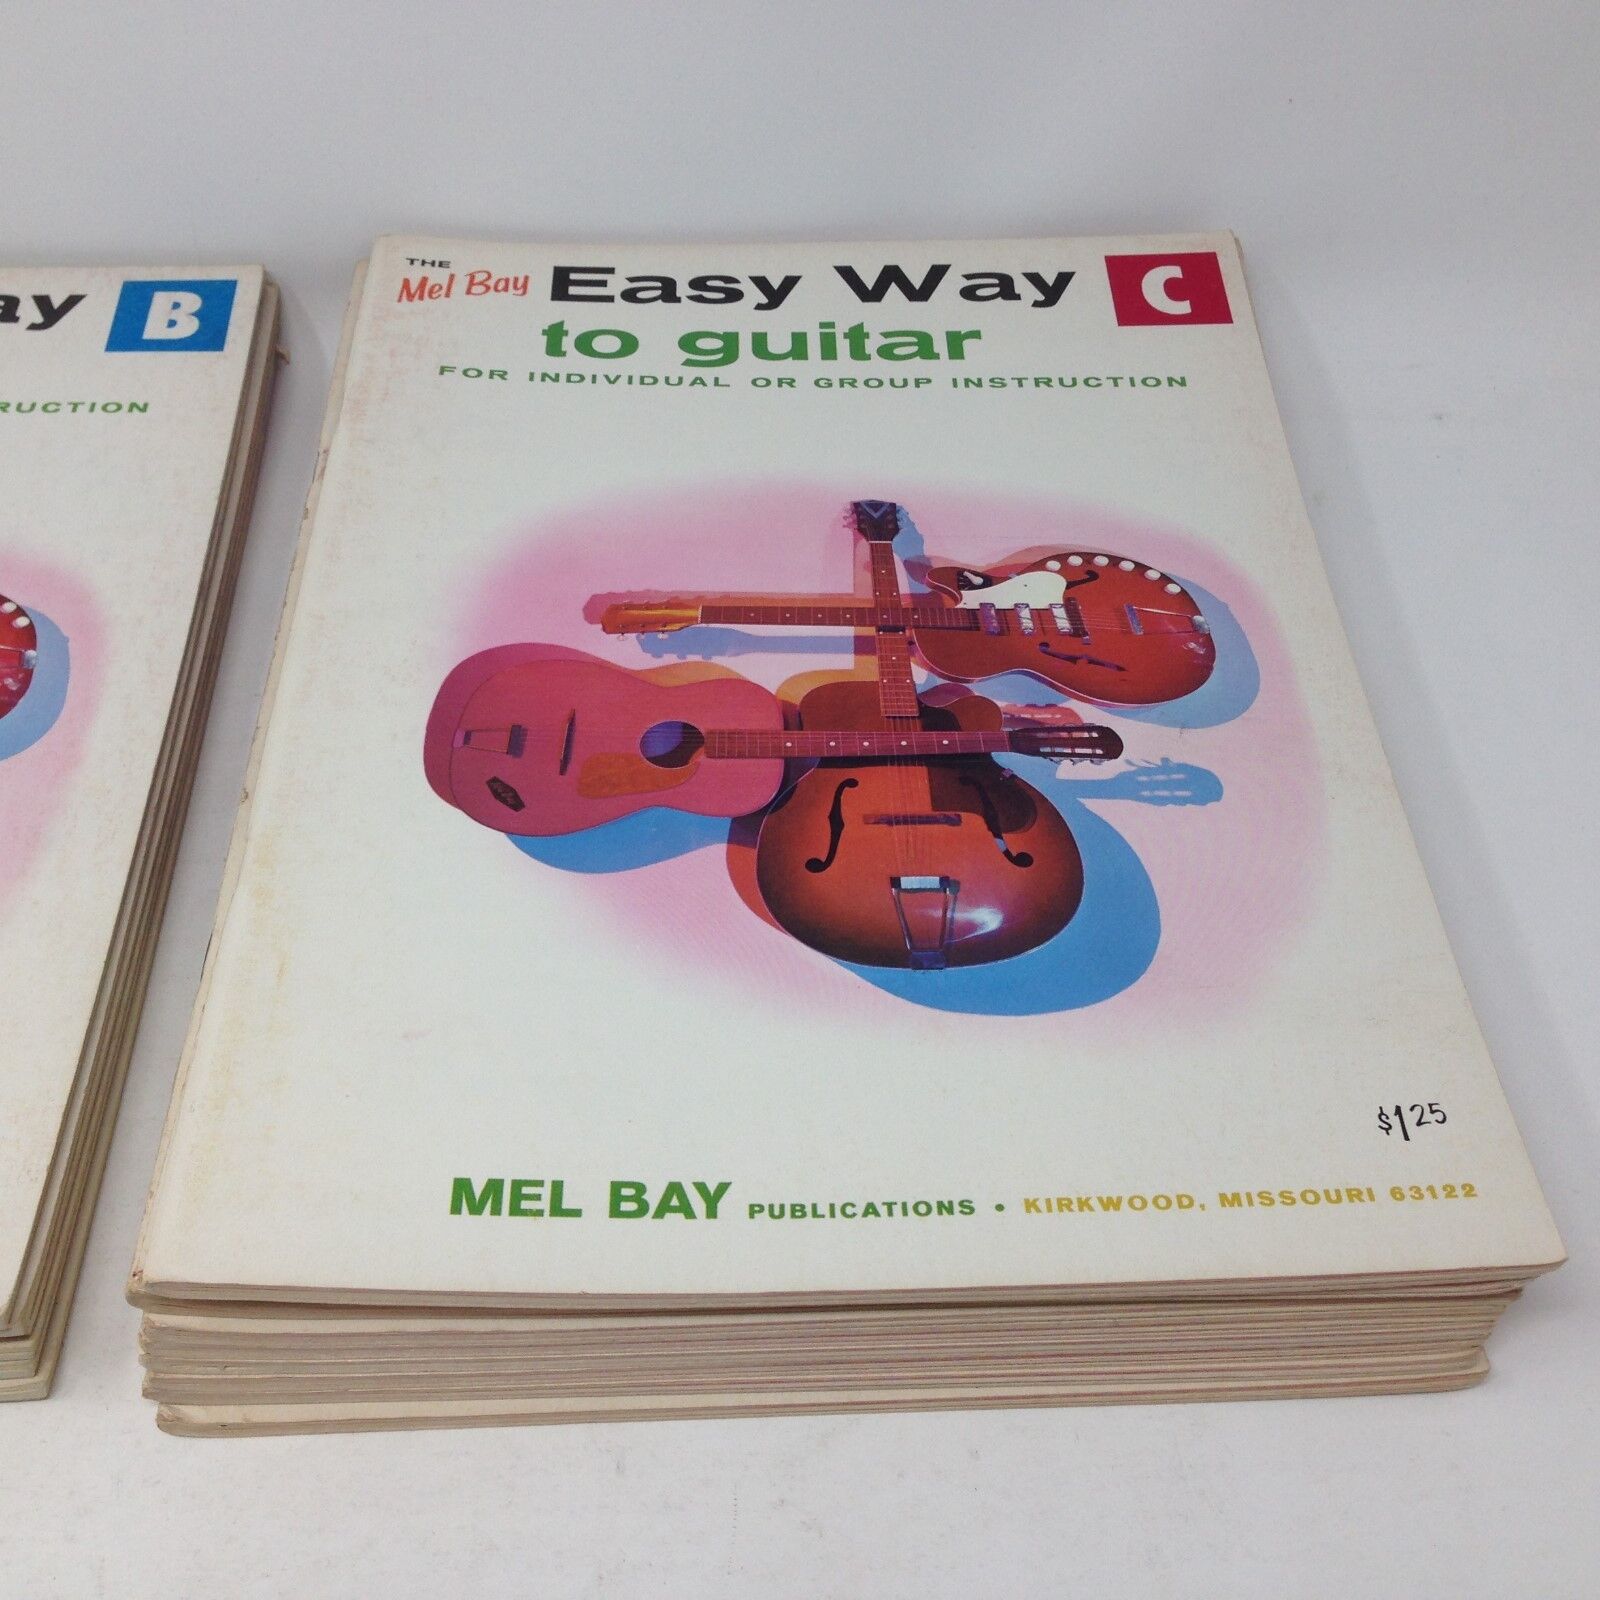 Vintage 1965 MEL BAY Easy Way to Guitar: Lot of one B booklets + one C booklets Без бренда - фотография #3